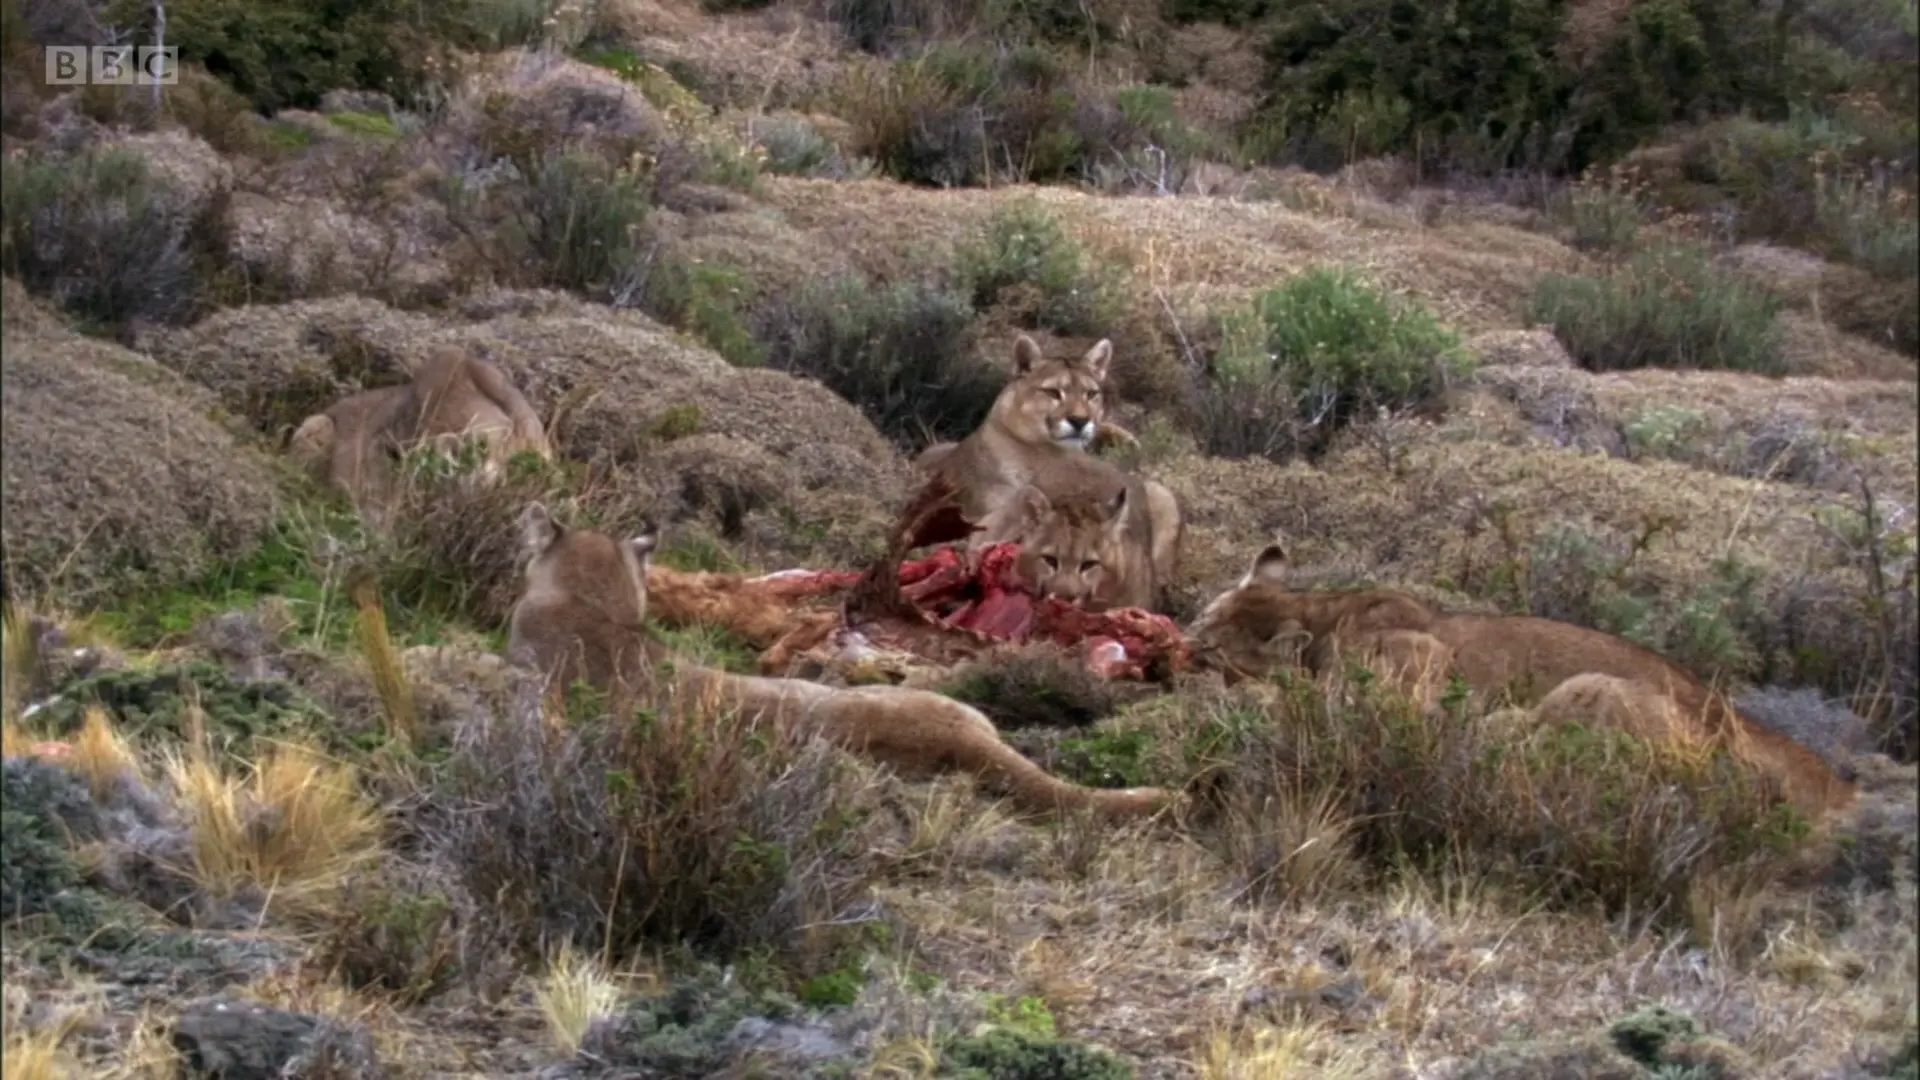 South American cougar (Puma concolor concolor) as shown in Planet Earth - Mountains